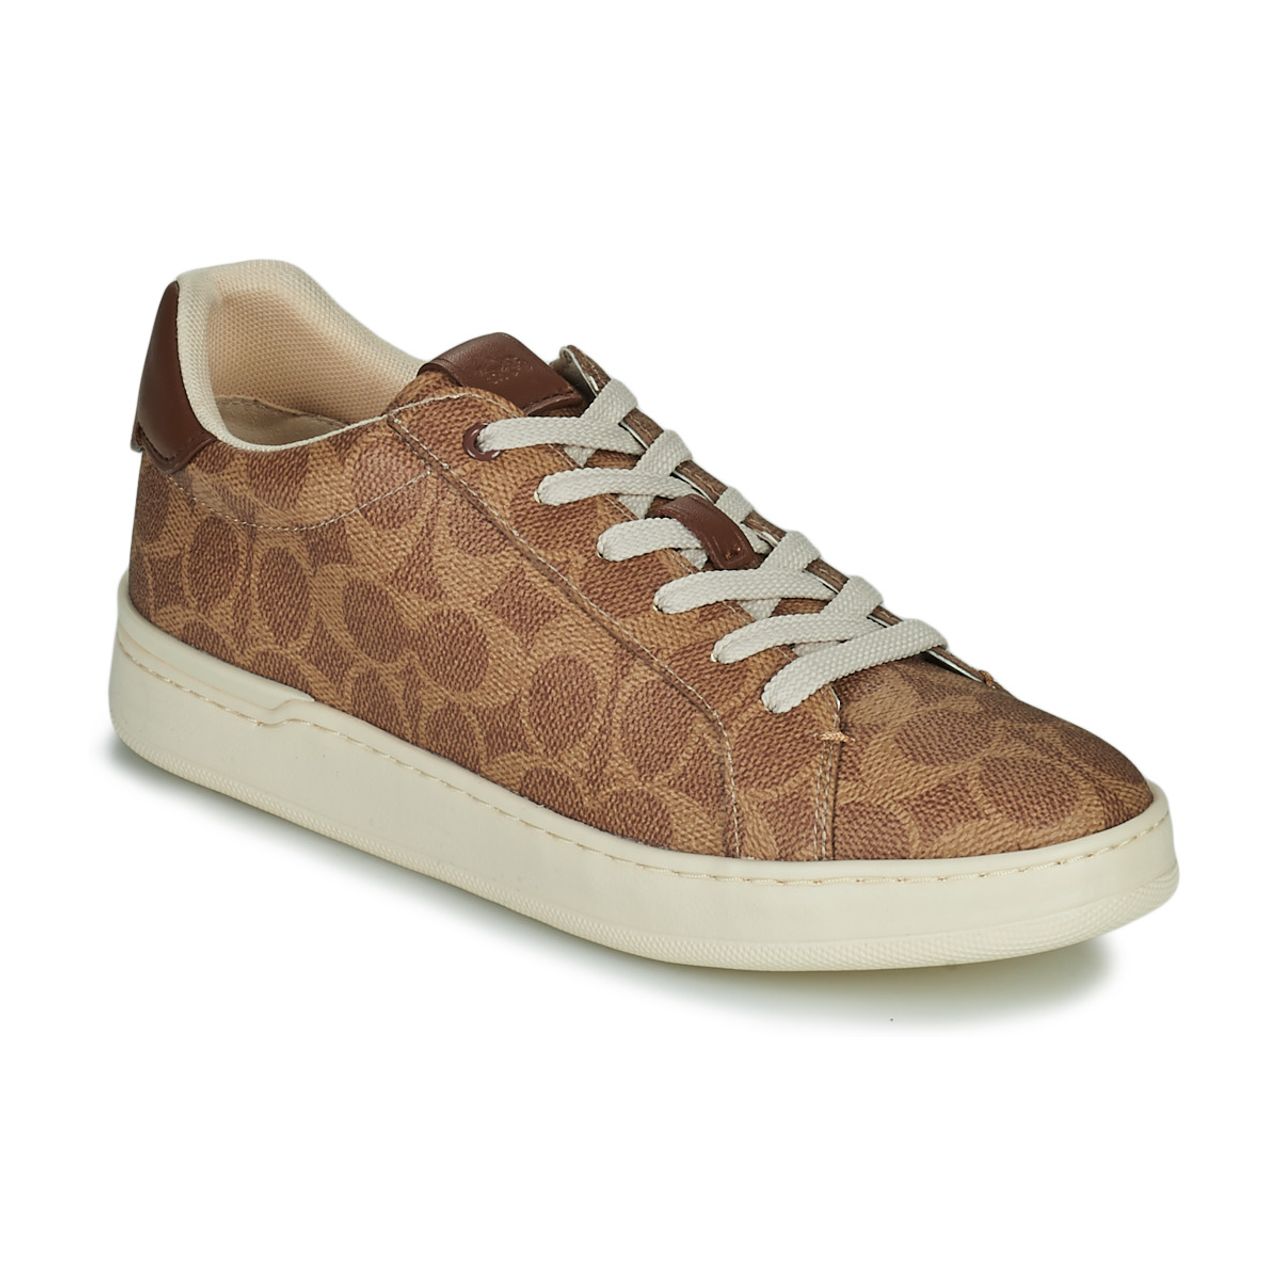 Coach Shoes (Trainers) LOWLINE (women) G5061-TN2 - Compare prices